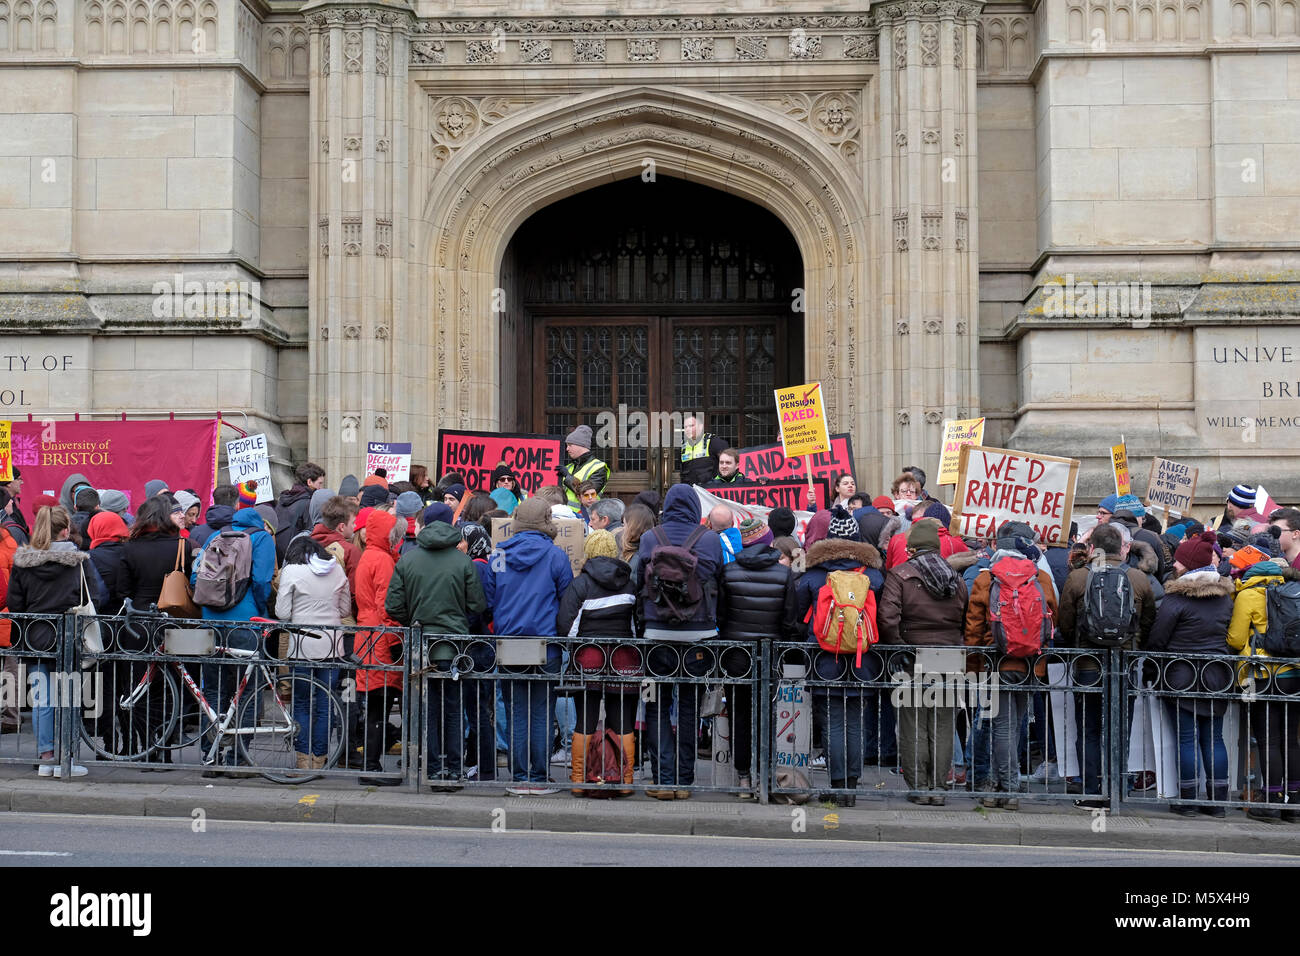 Bristol, UK. 26th February, 2018. Striking university staff picket outside the University of Bristol’s Wills Memorial Building while the university’s senate meets inside. The University and College Union (UCU) has called its members out on strike in protest at proposed changes to their pension scheme. Keith Ramsey/Alamy Live News Stock Photo